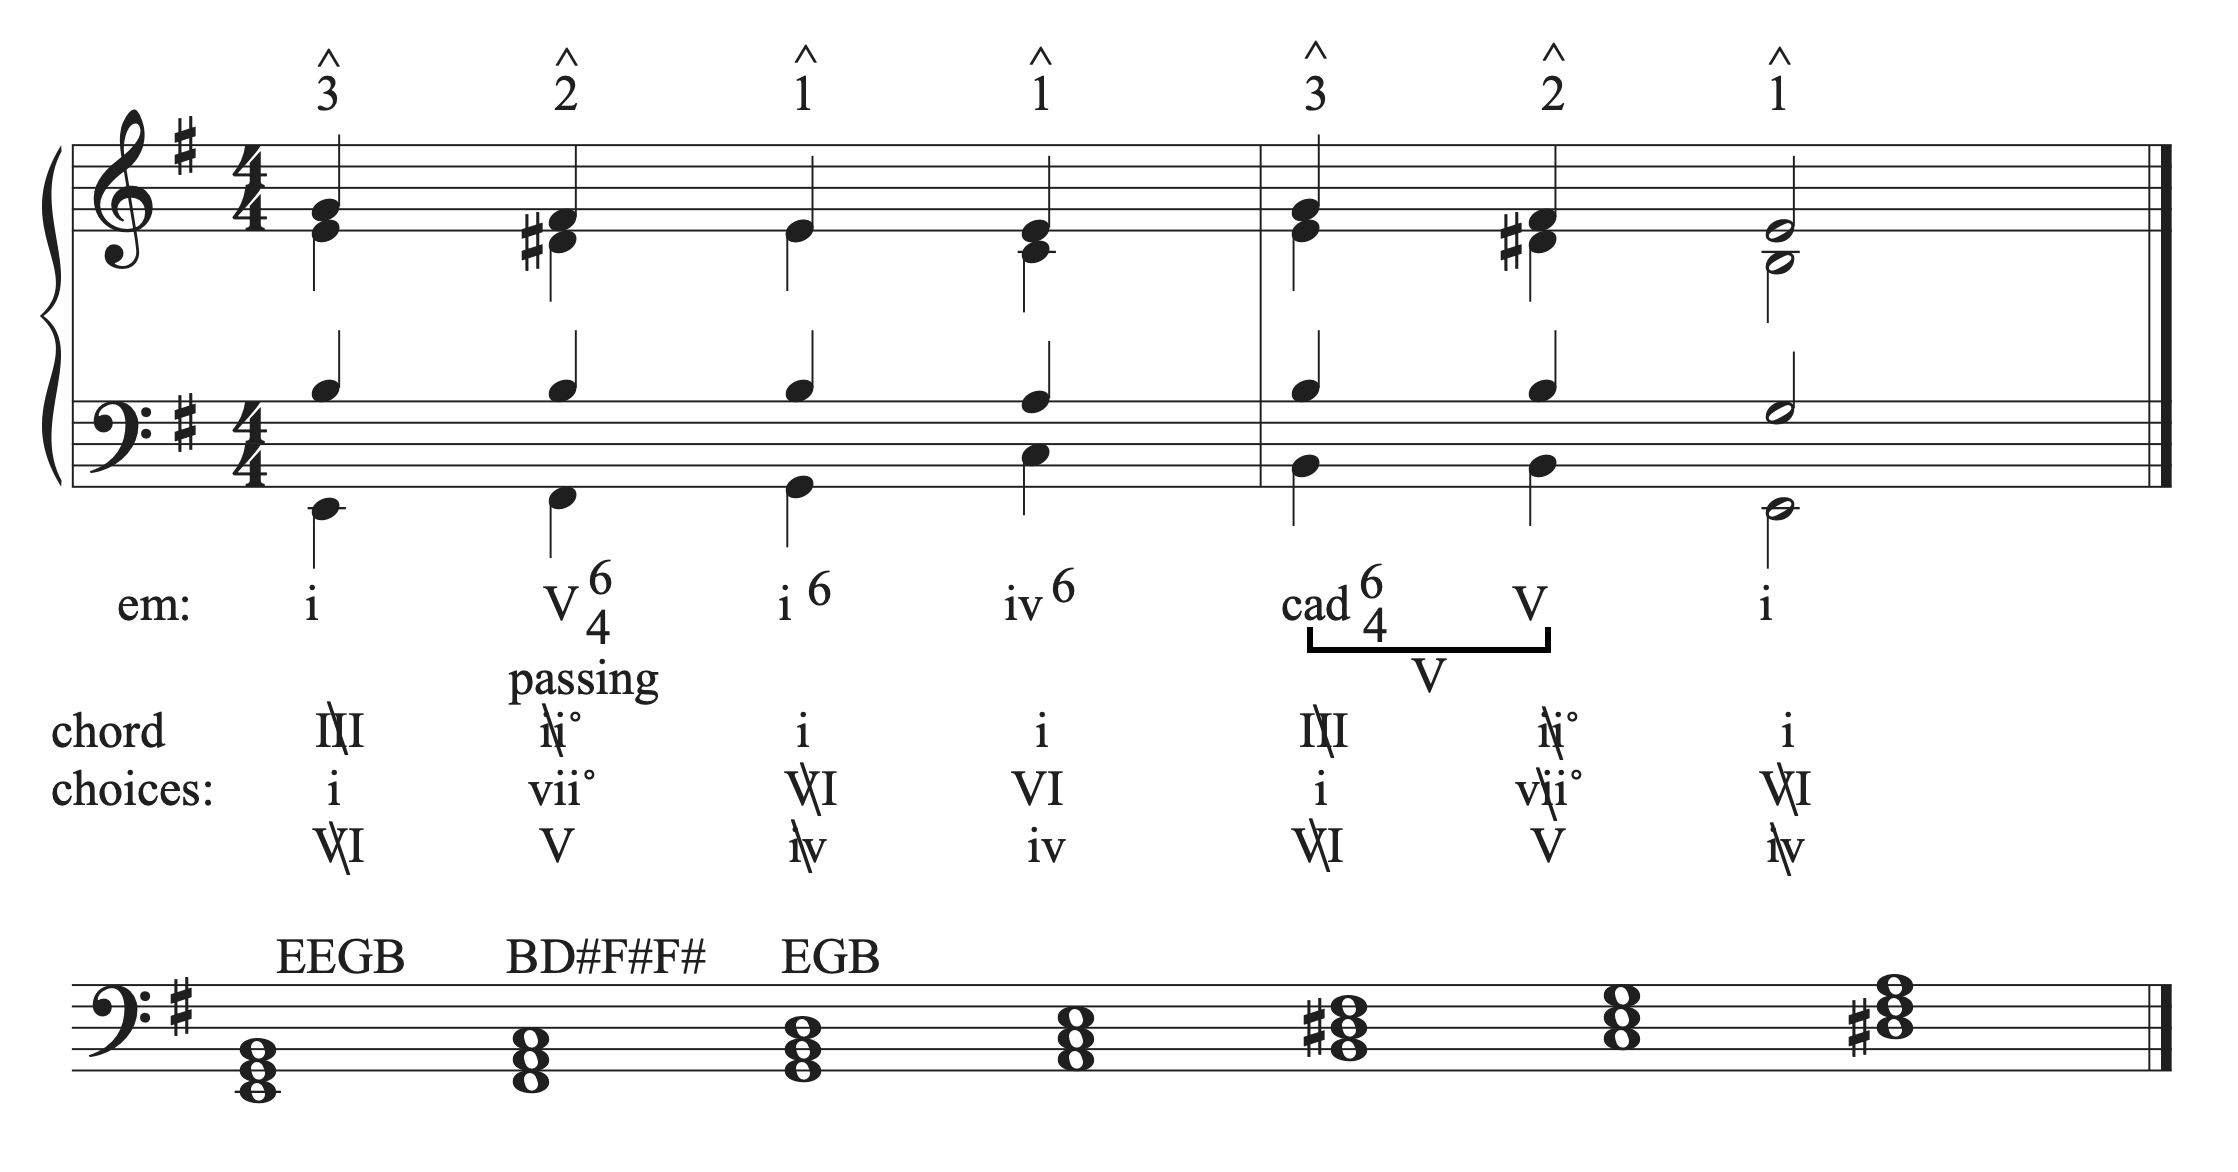 The completed musical example in G major.